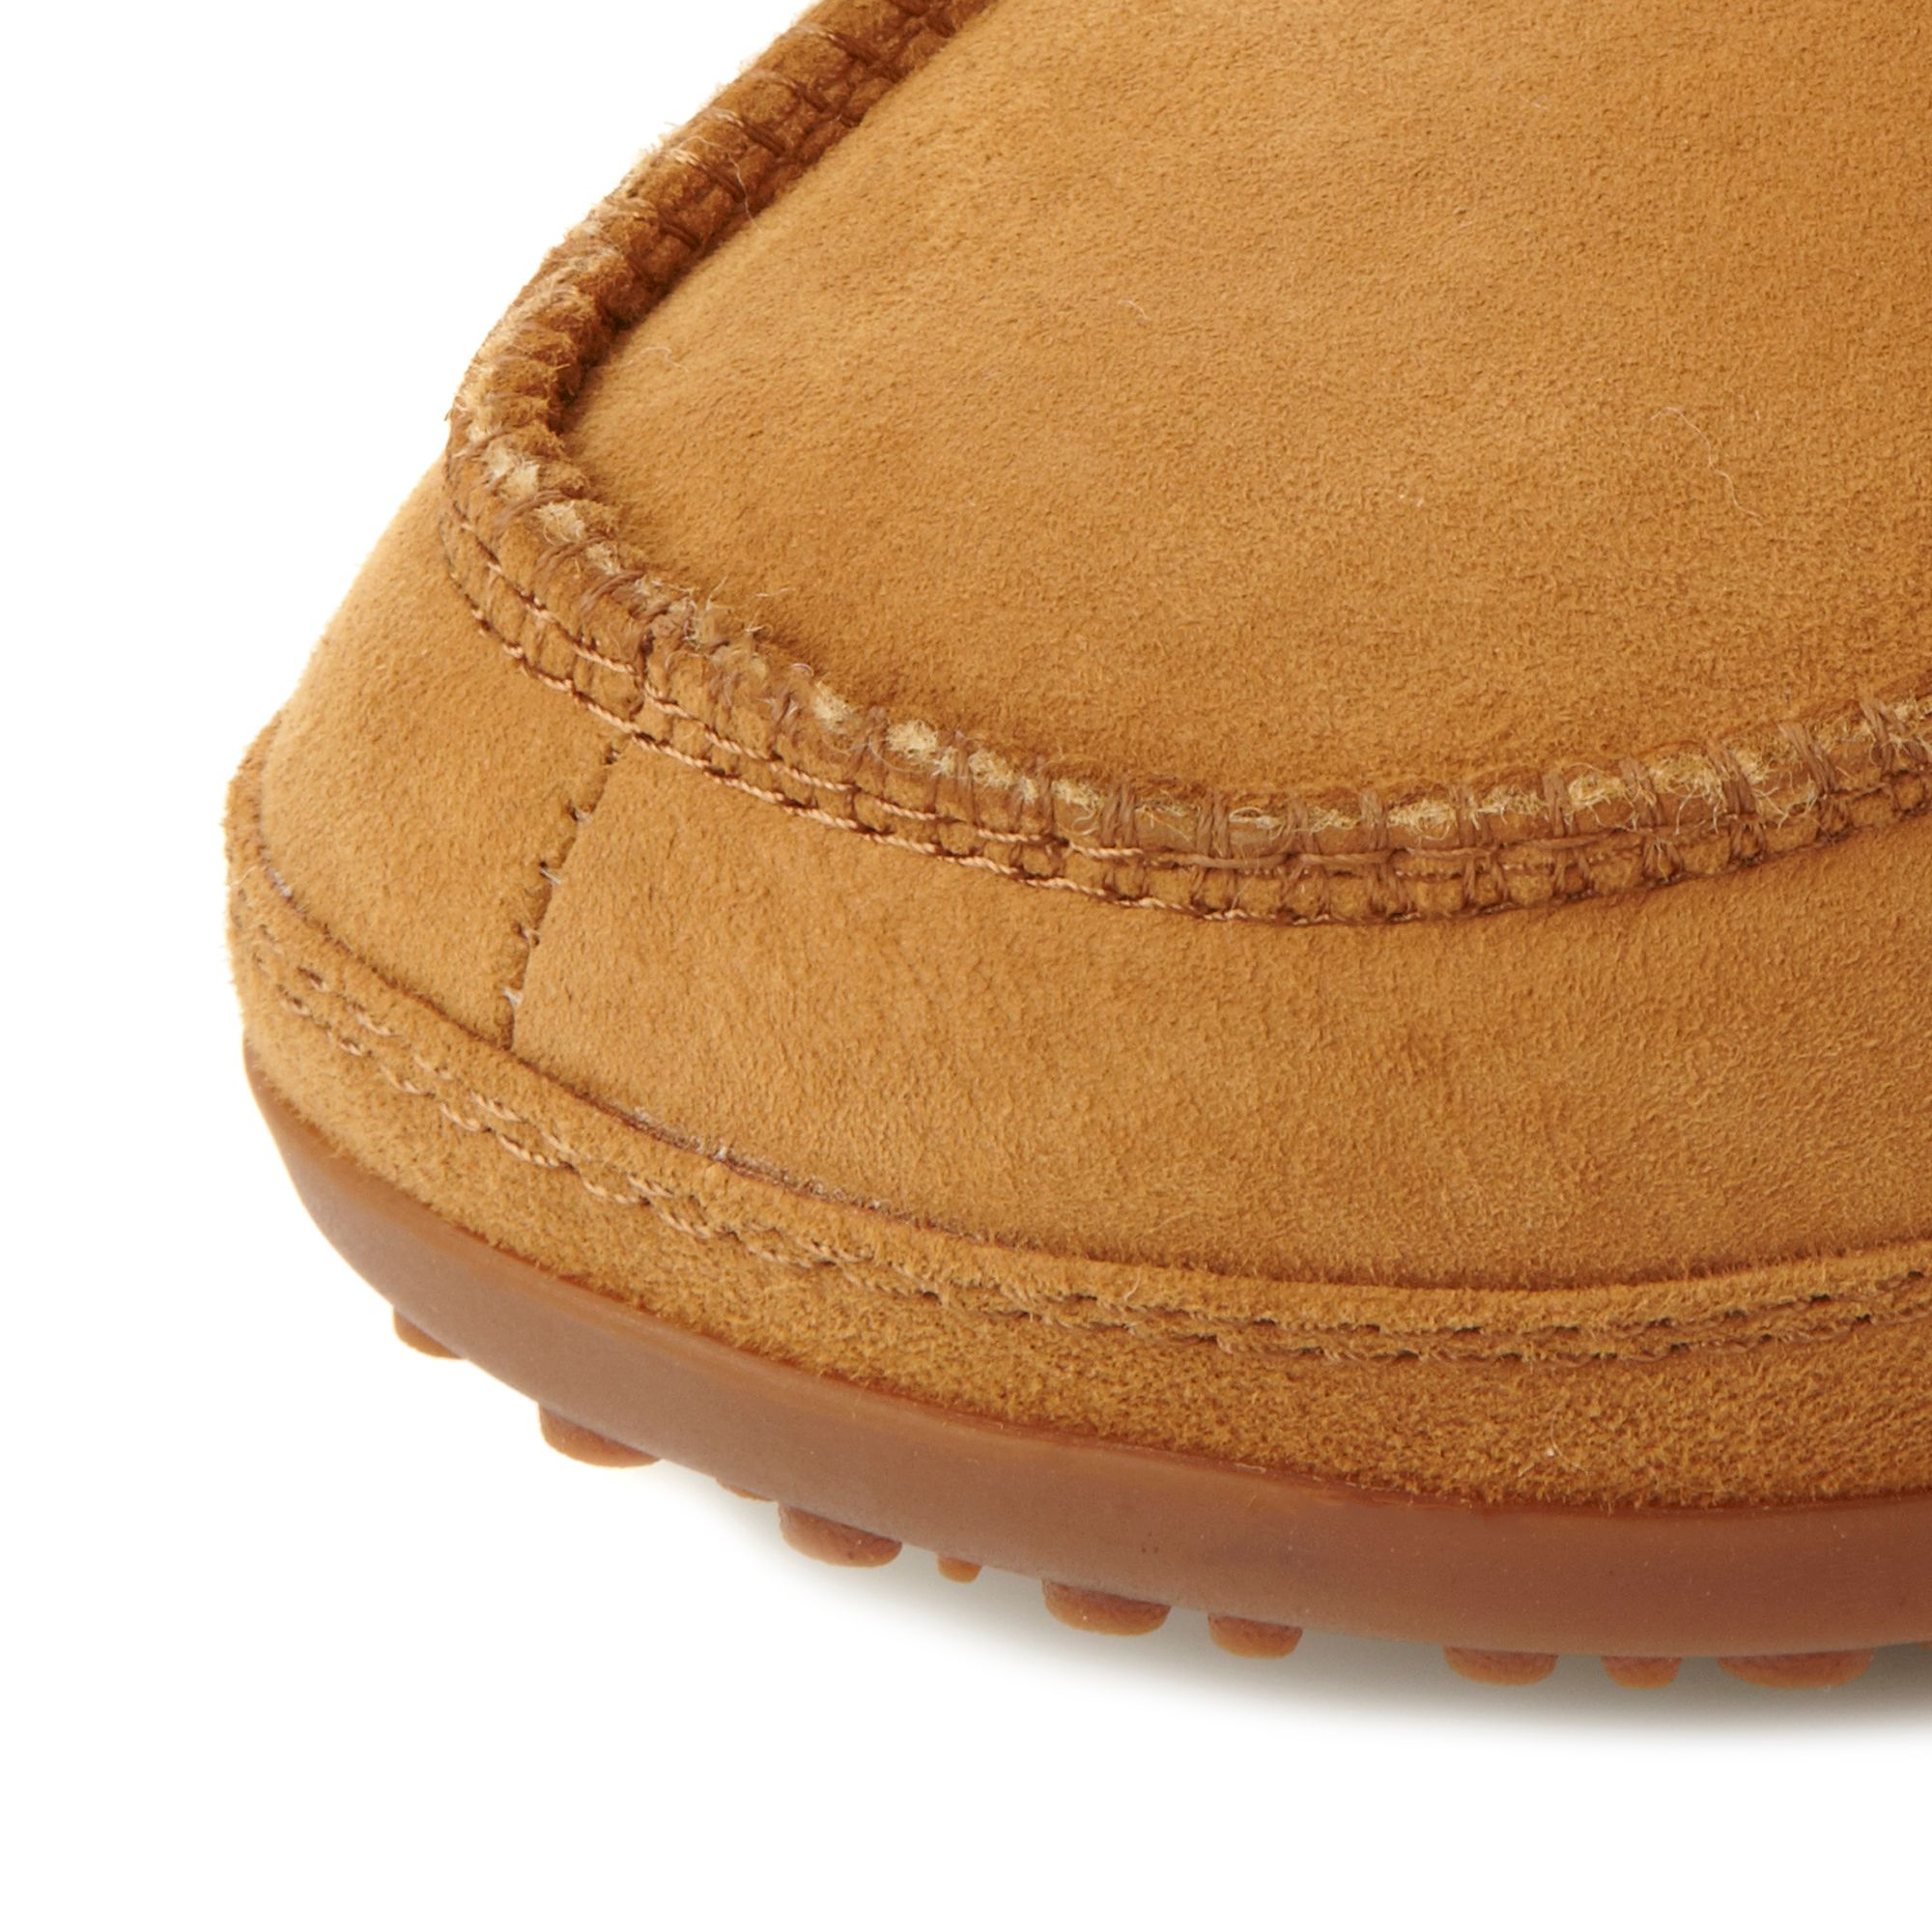 Fitflop Mukluk Moc 2 Short Warm Lined Boots in Tan (Brown) - Lyst